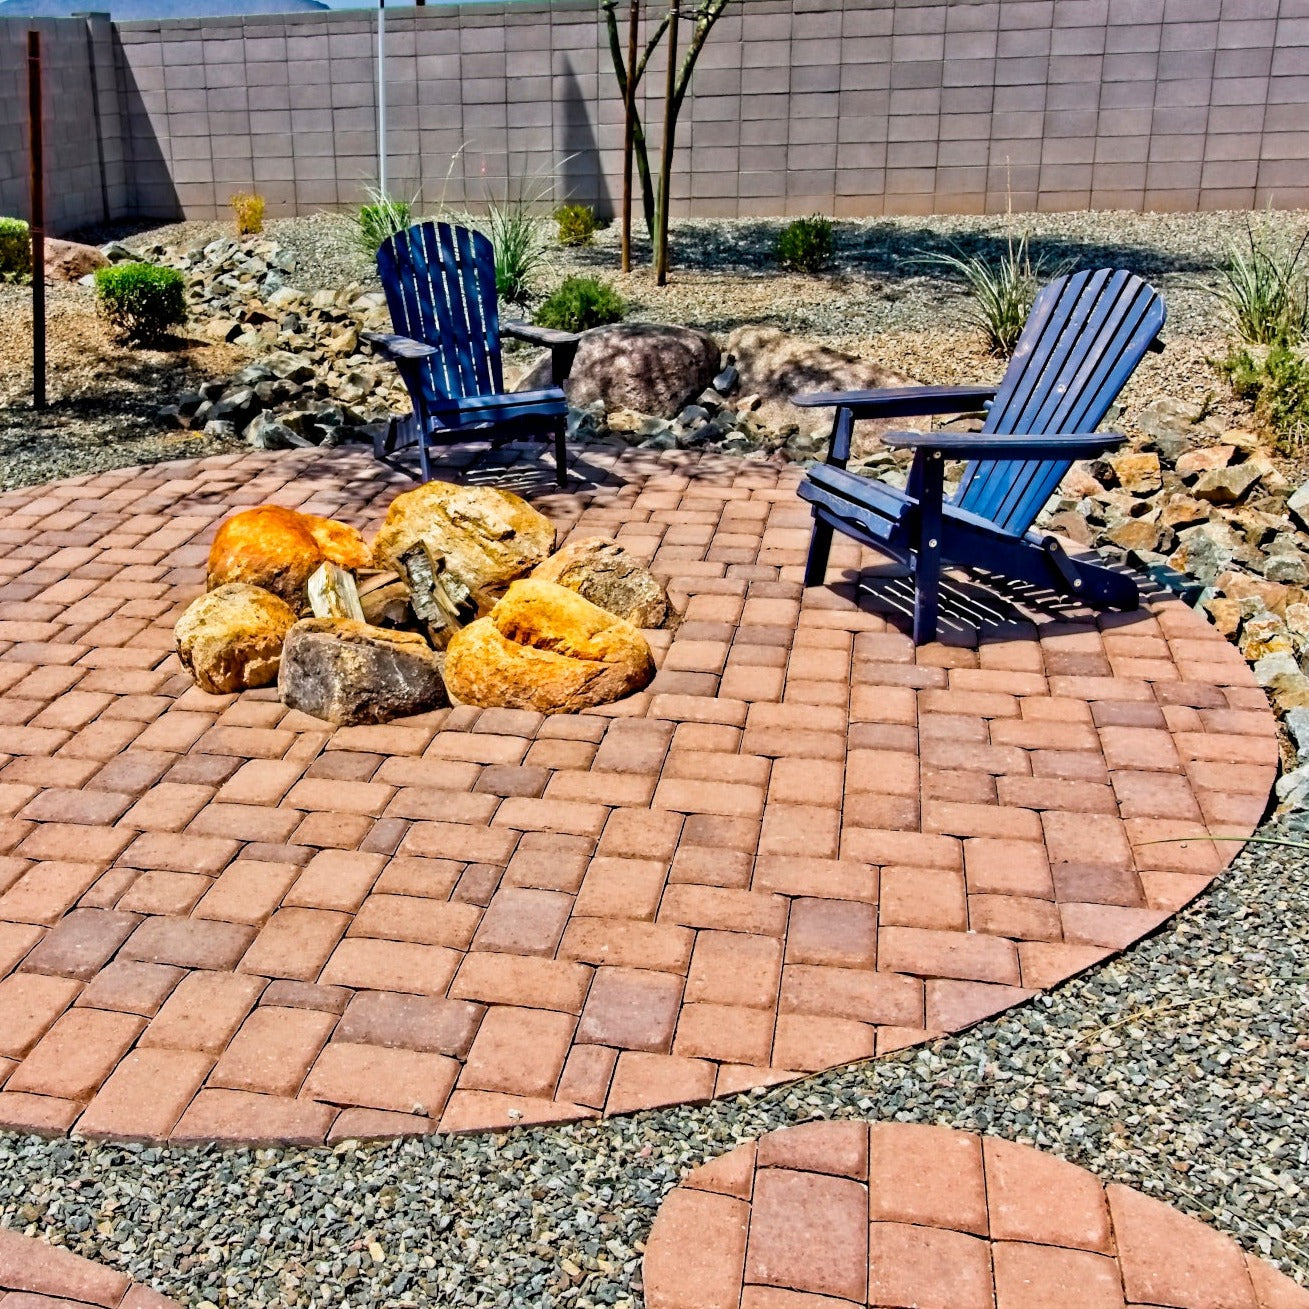 DuraWeb Fabric Circle is great for firepits